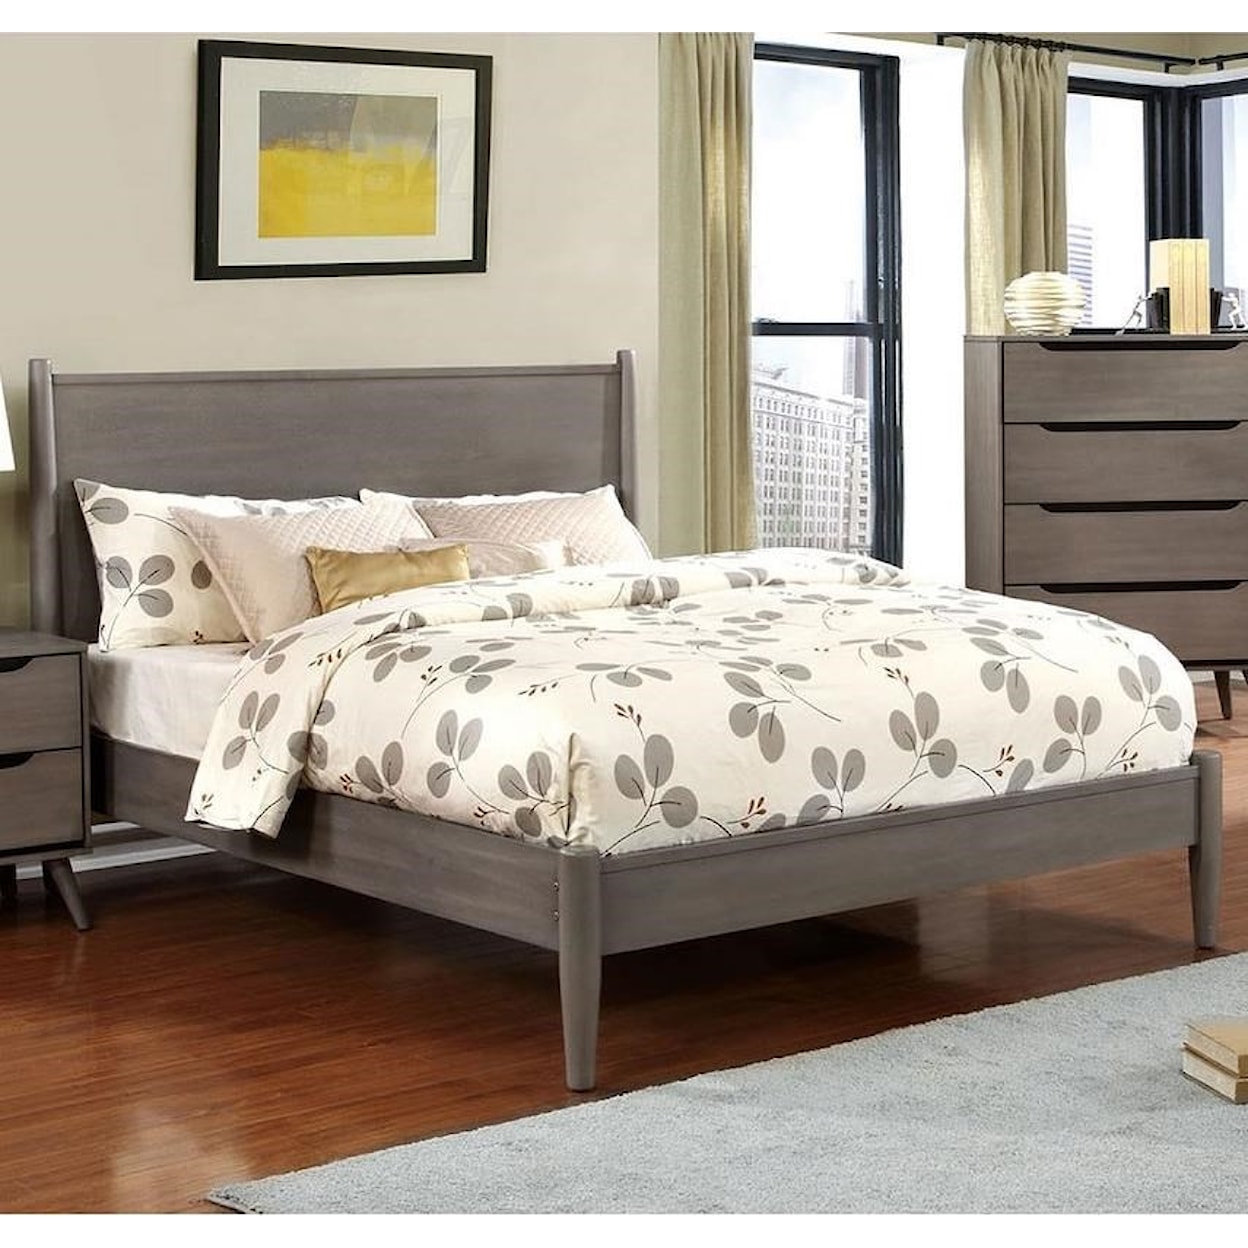 Furniture of America Lennart King Bed